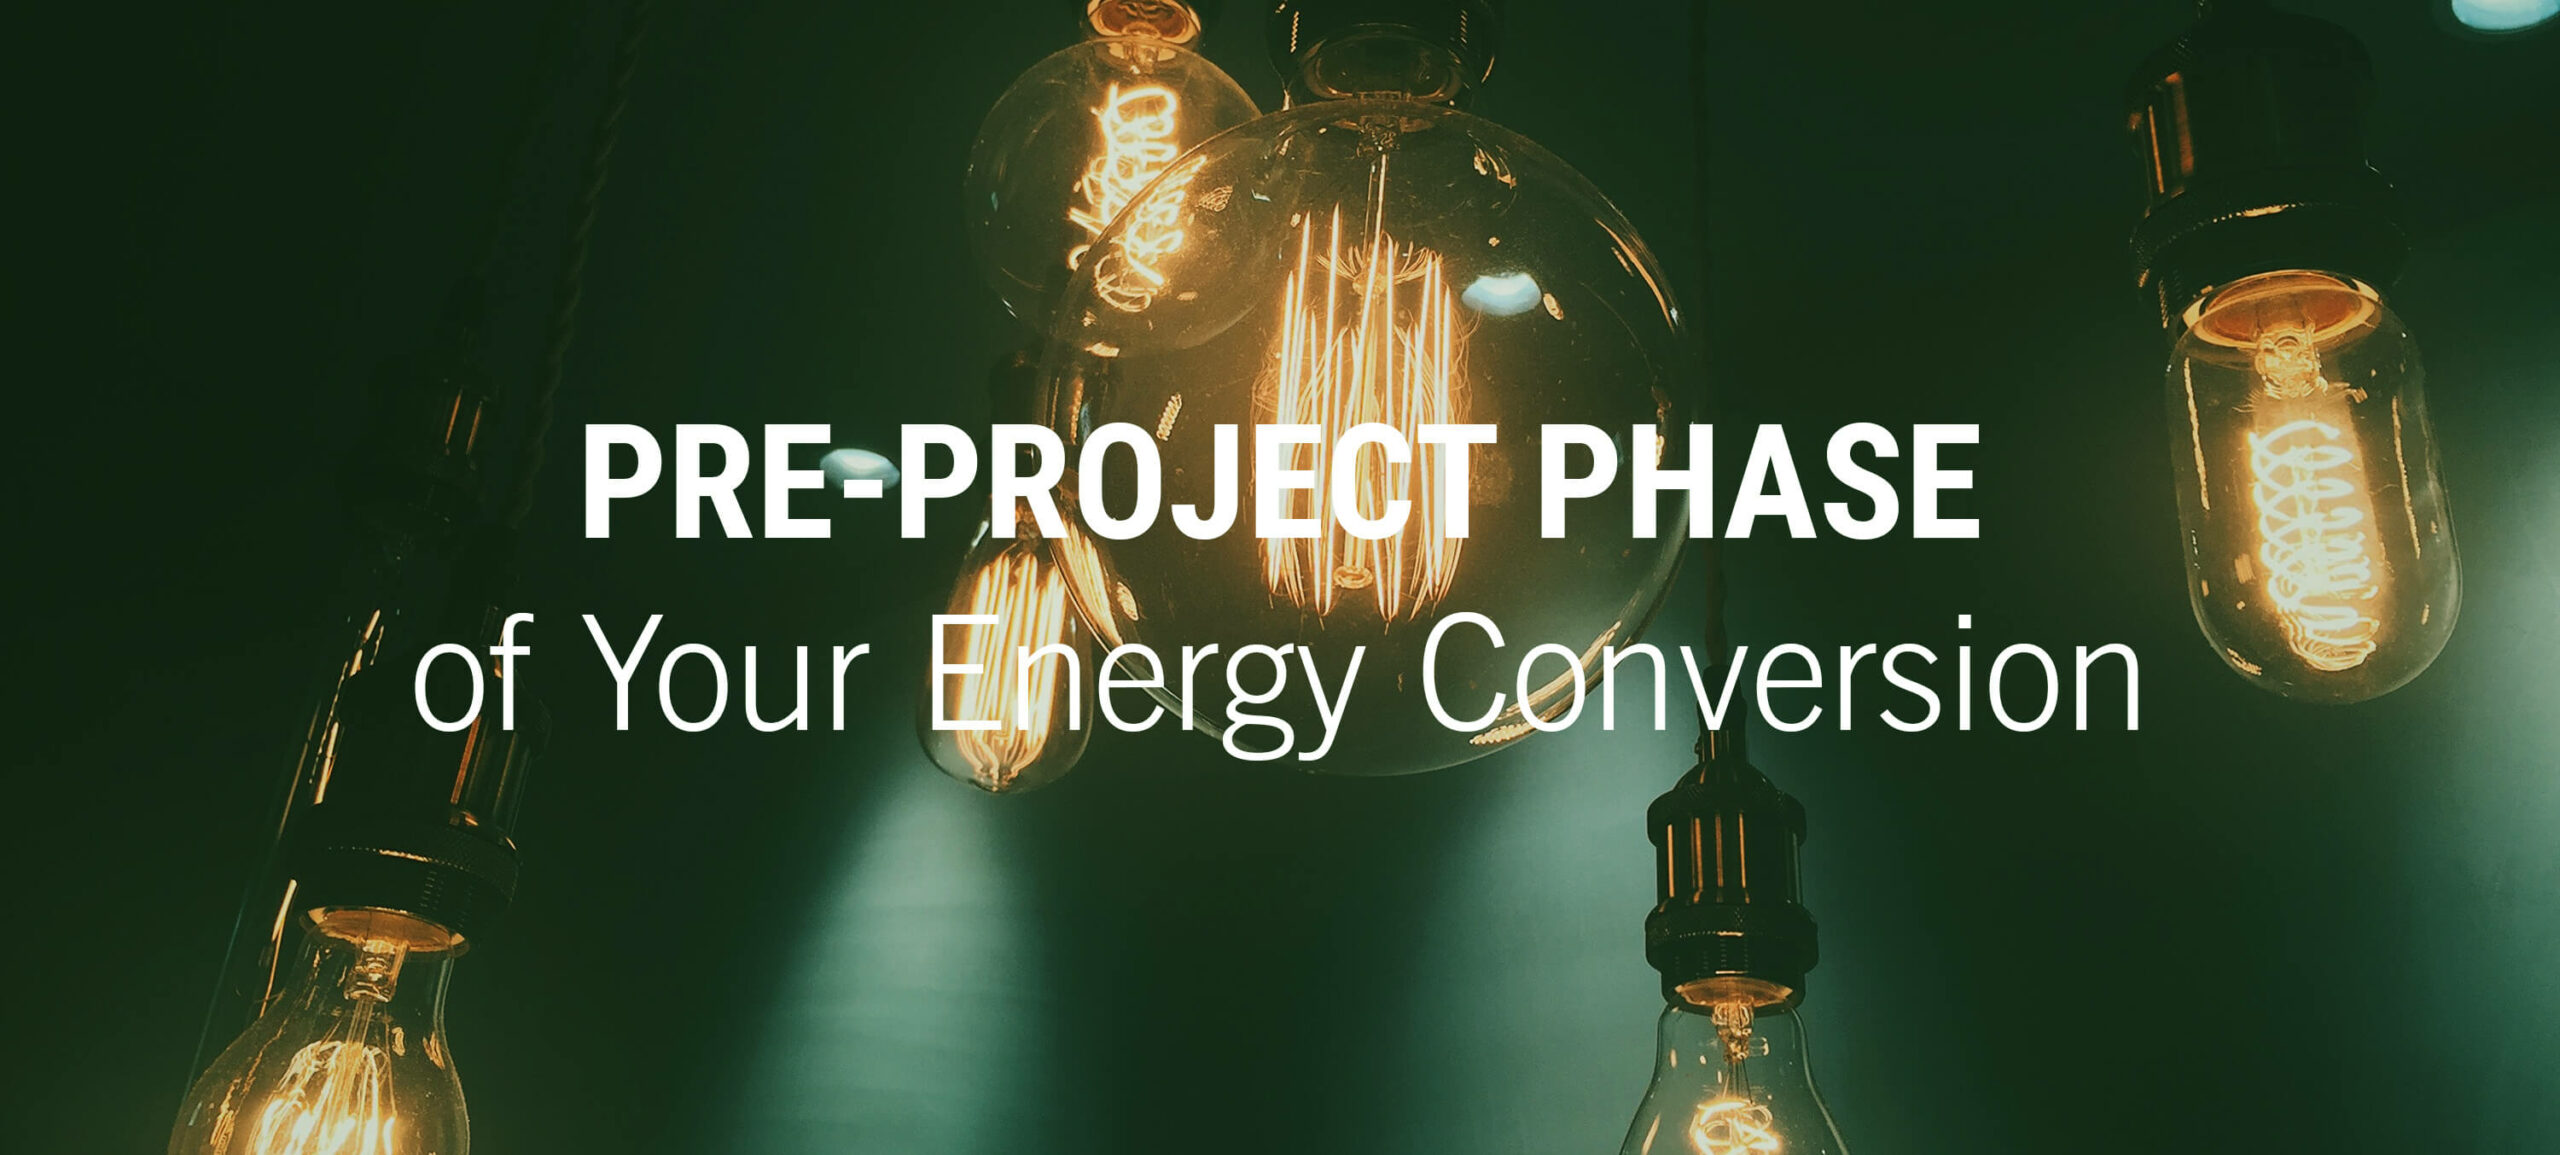 CONSULTING ENERGY CONVERSION